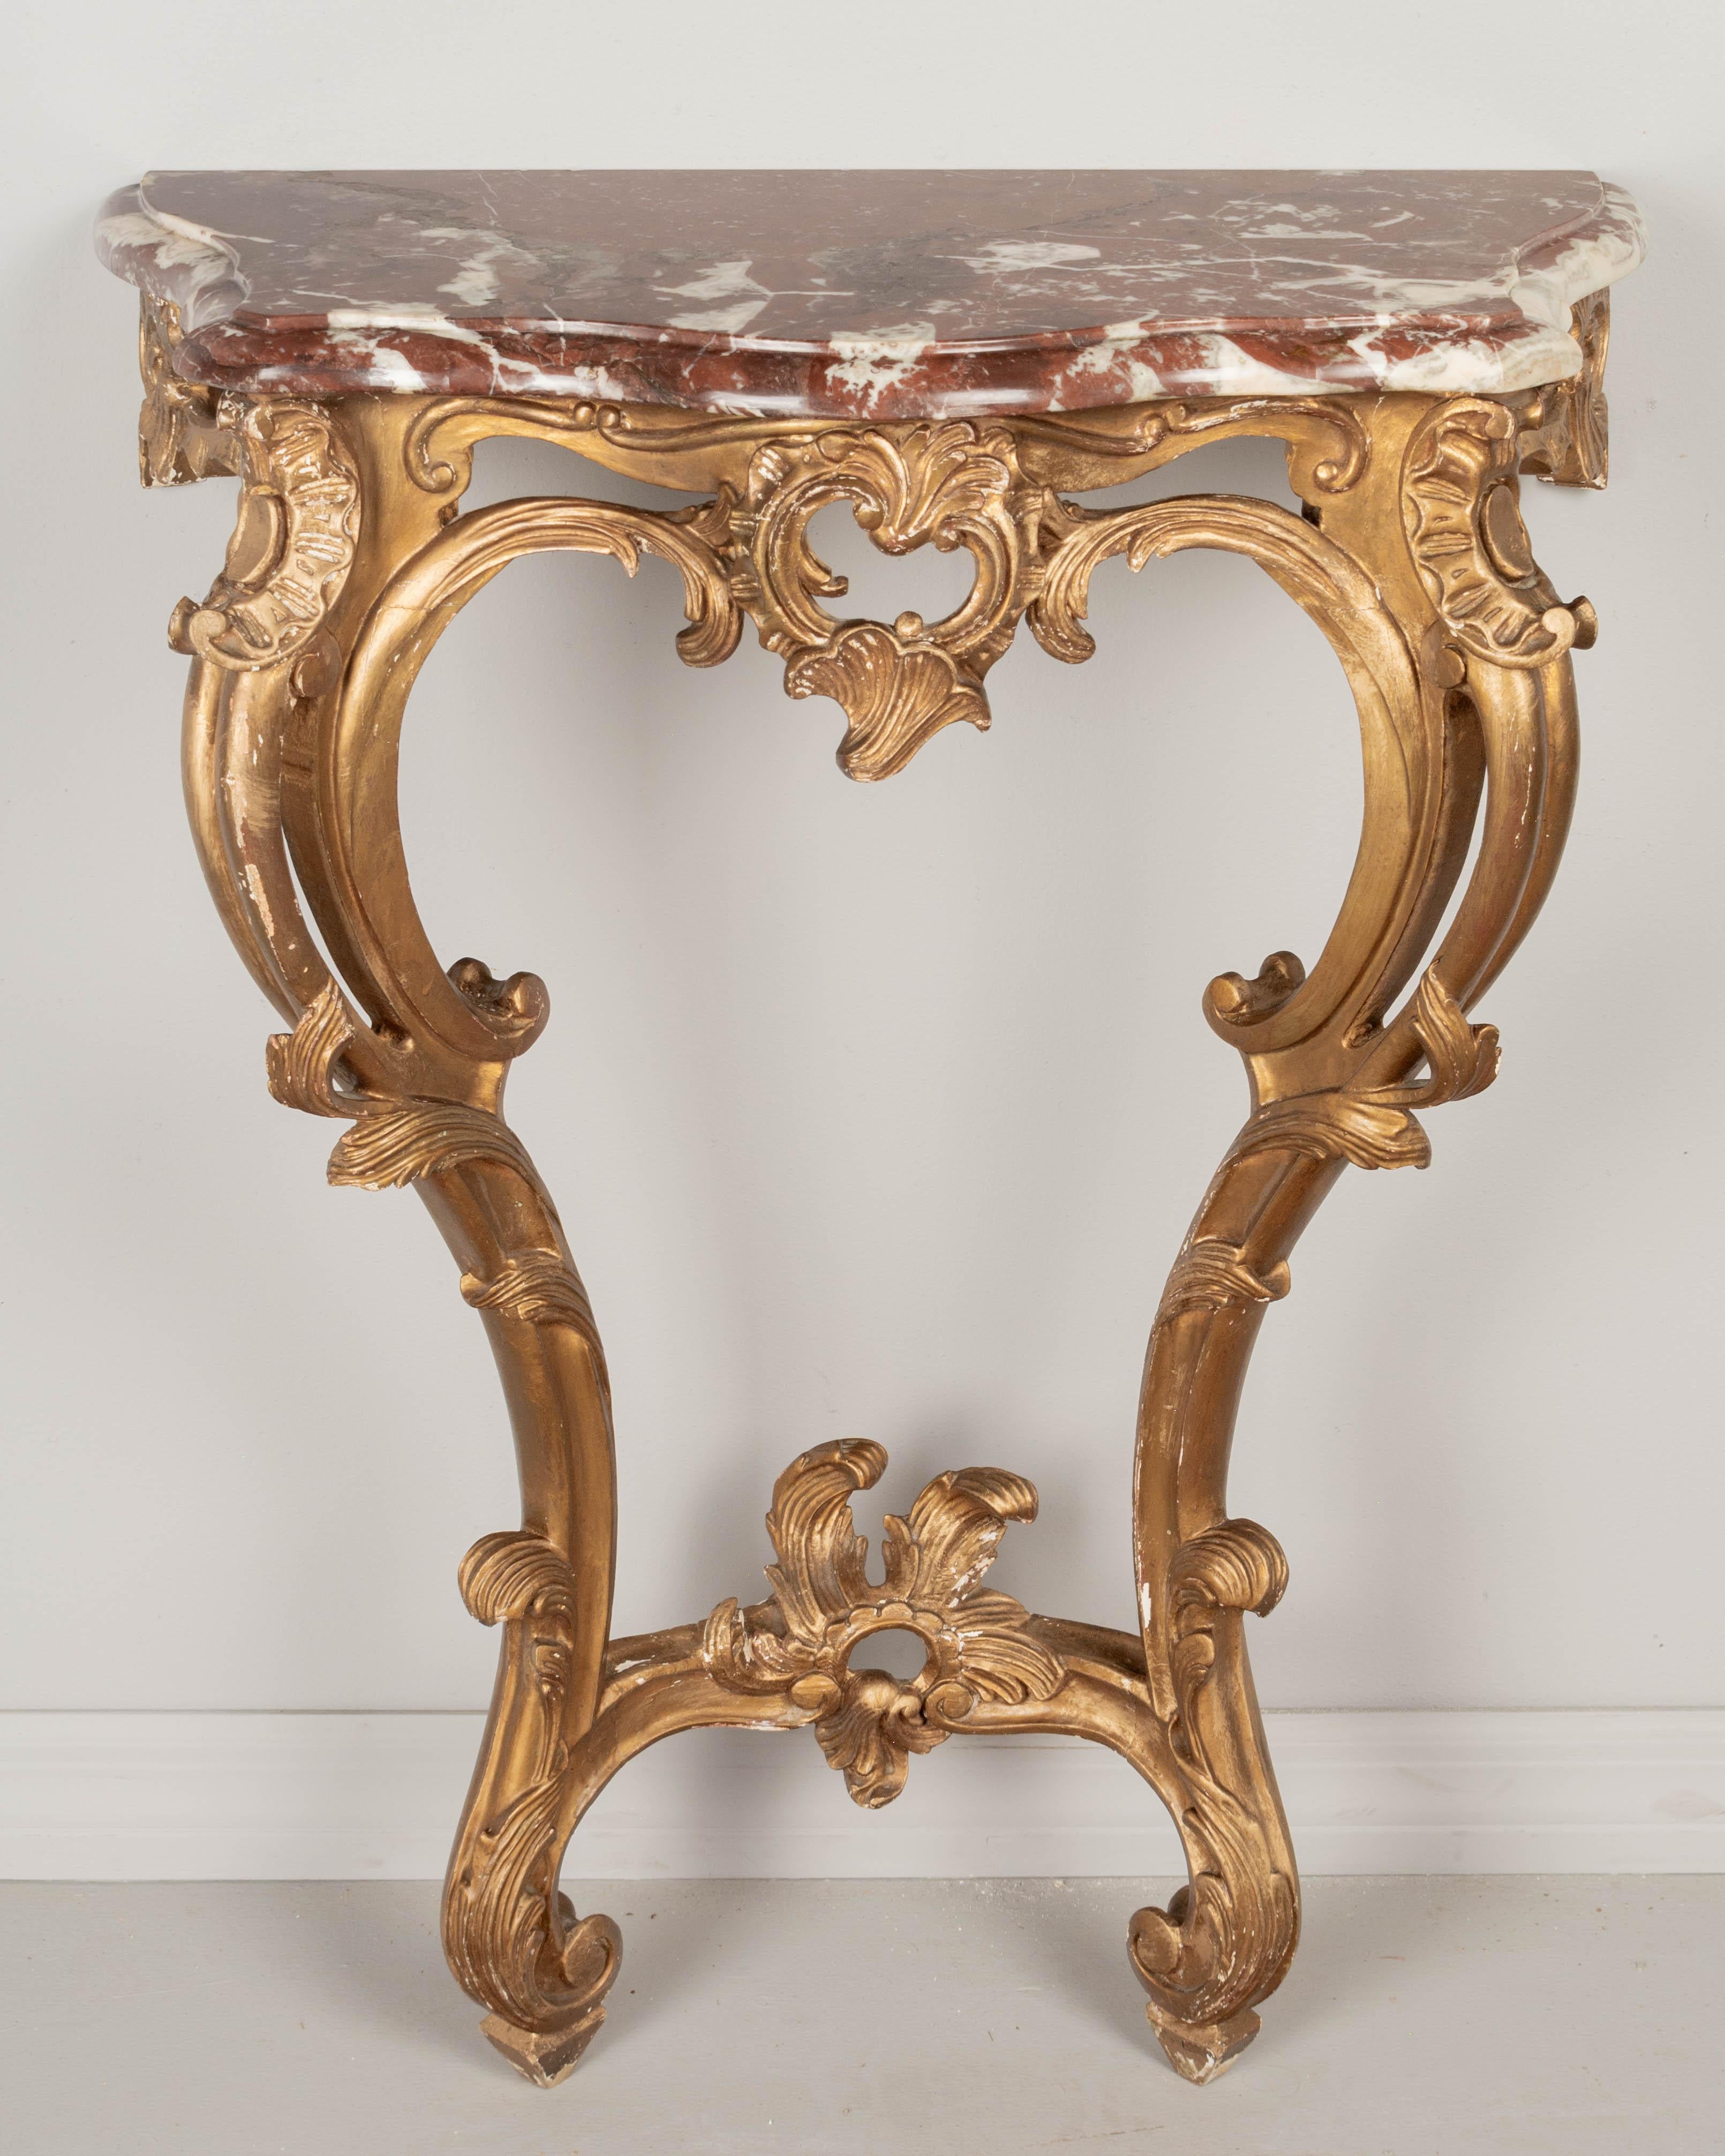 An early 20th century French Louis XV style giltwood console with carved foliate details and warm gold painted patina. Original Rouge Royale marble top. Minor chips and some paint loss. Must be fastened to the wall. Circa 1900-1920.
25.5